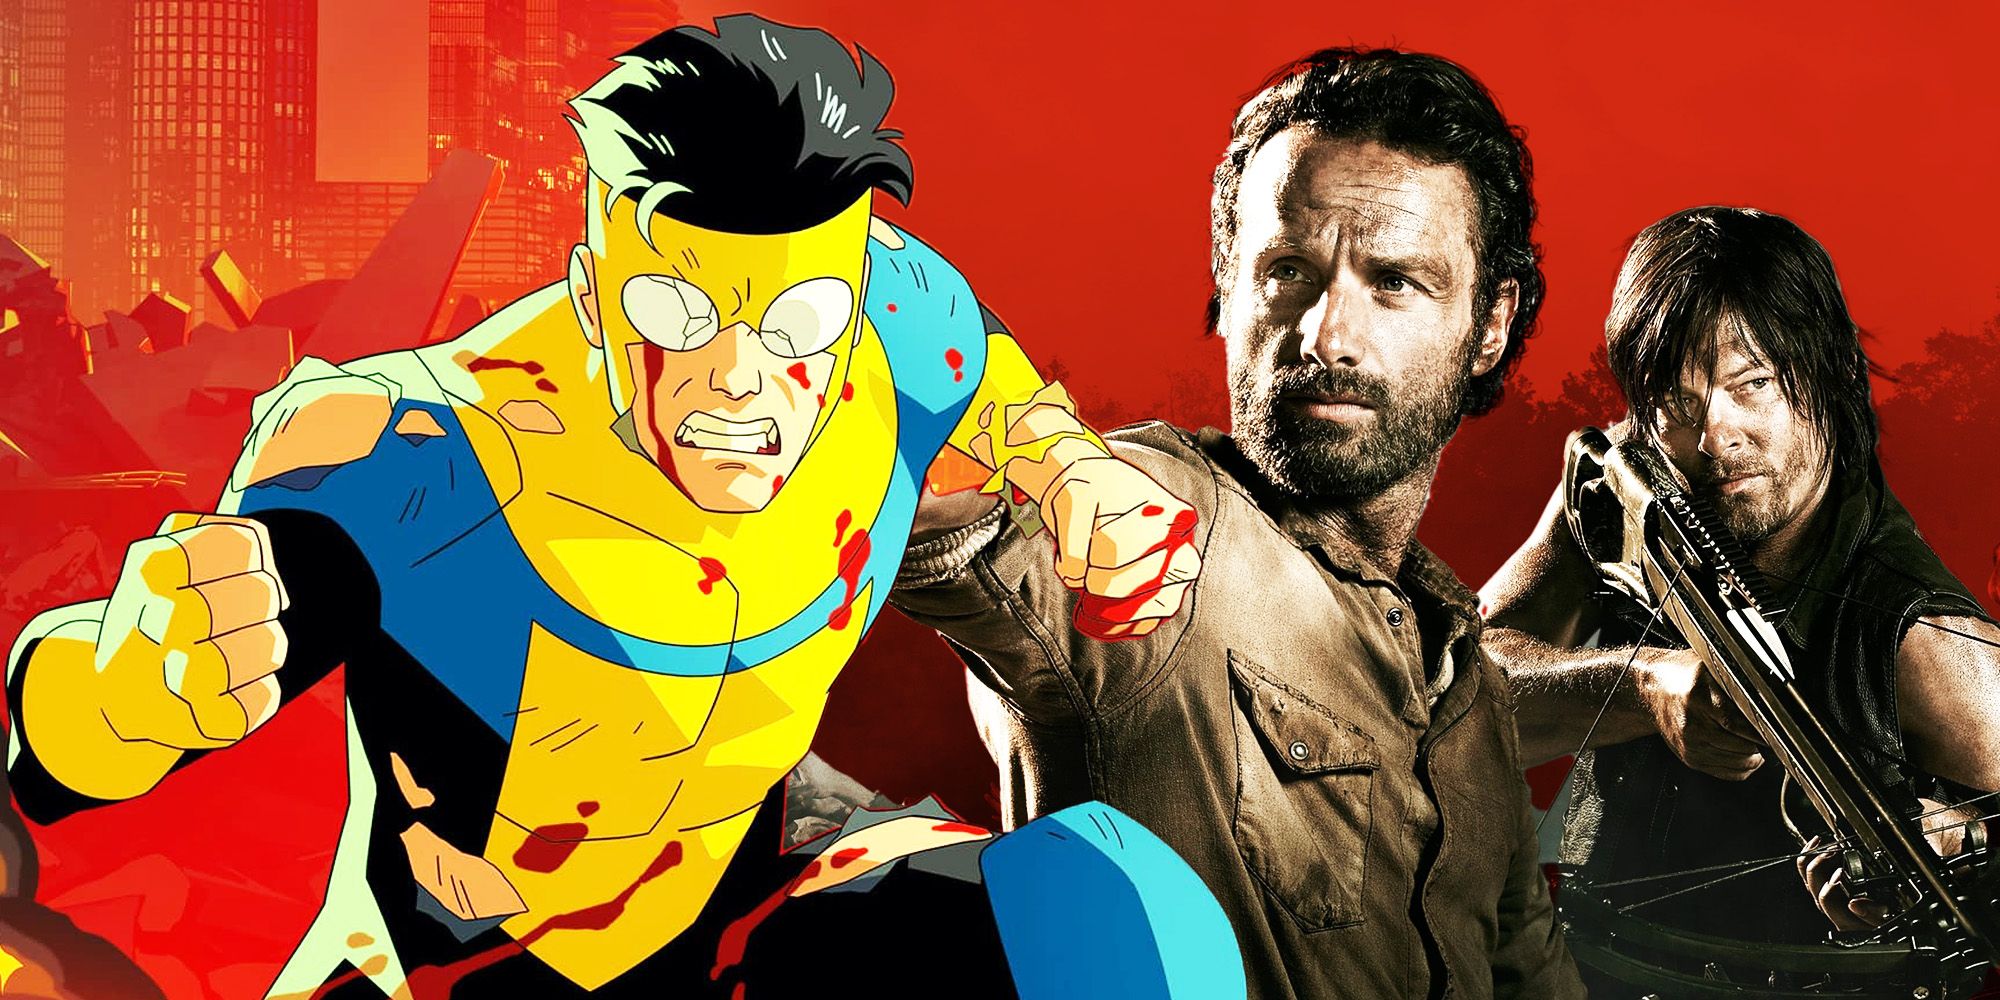 Collage image of Invincible and The Walking Dead